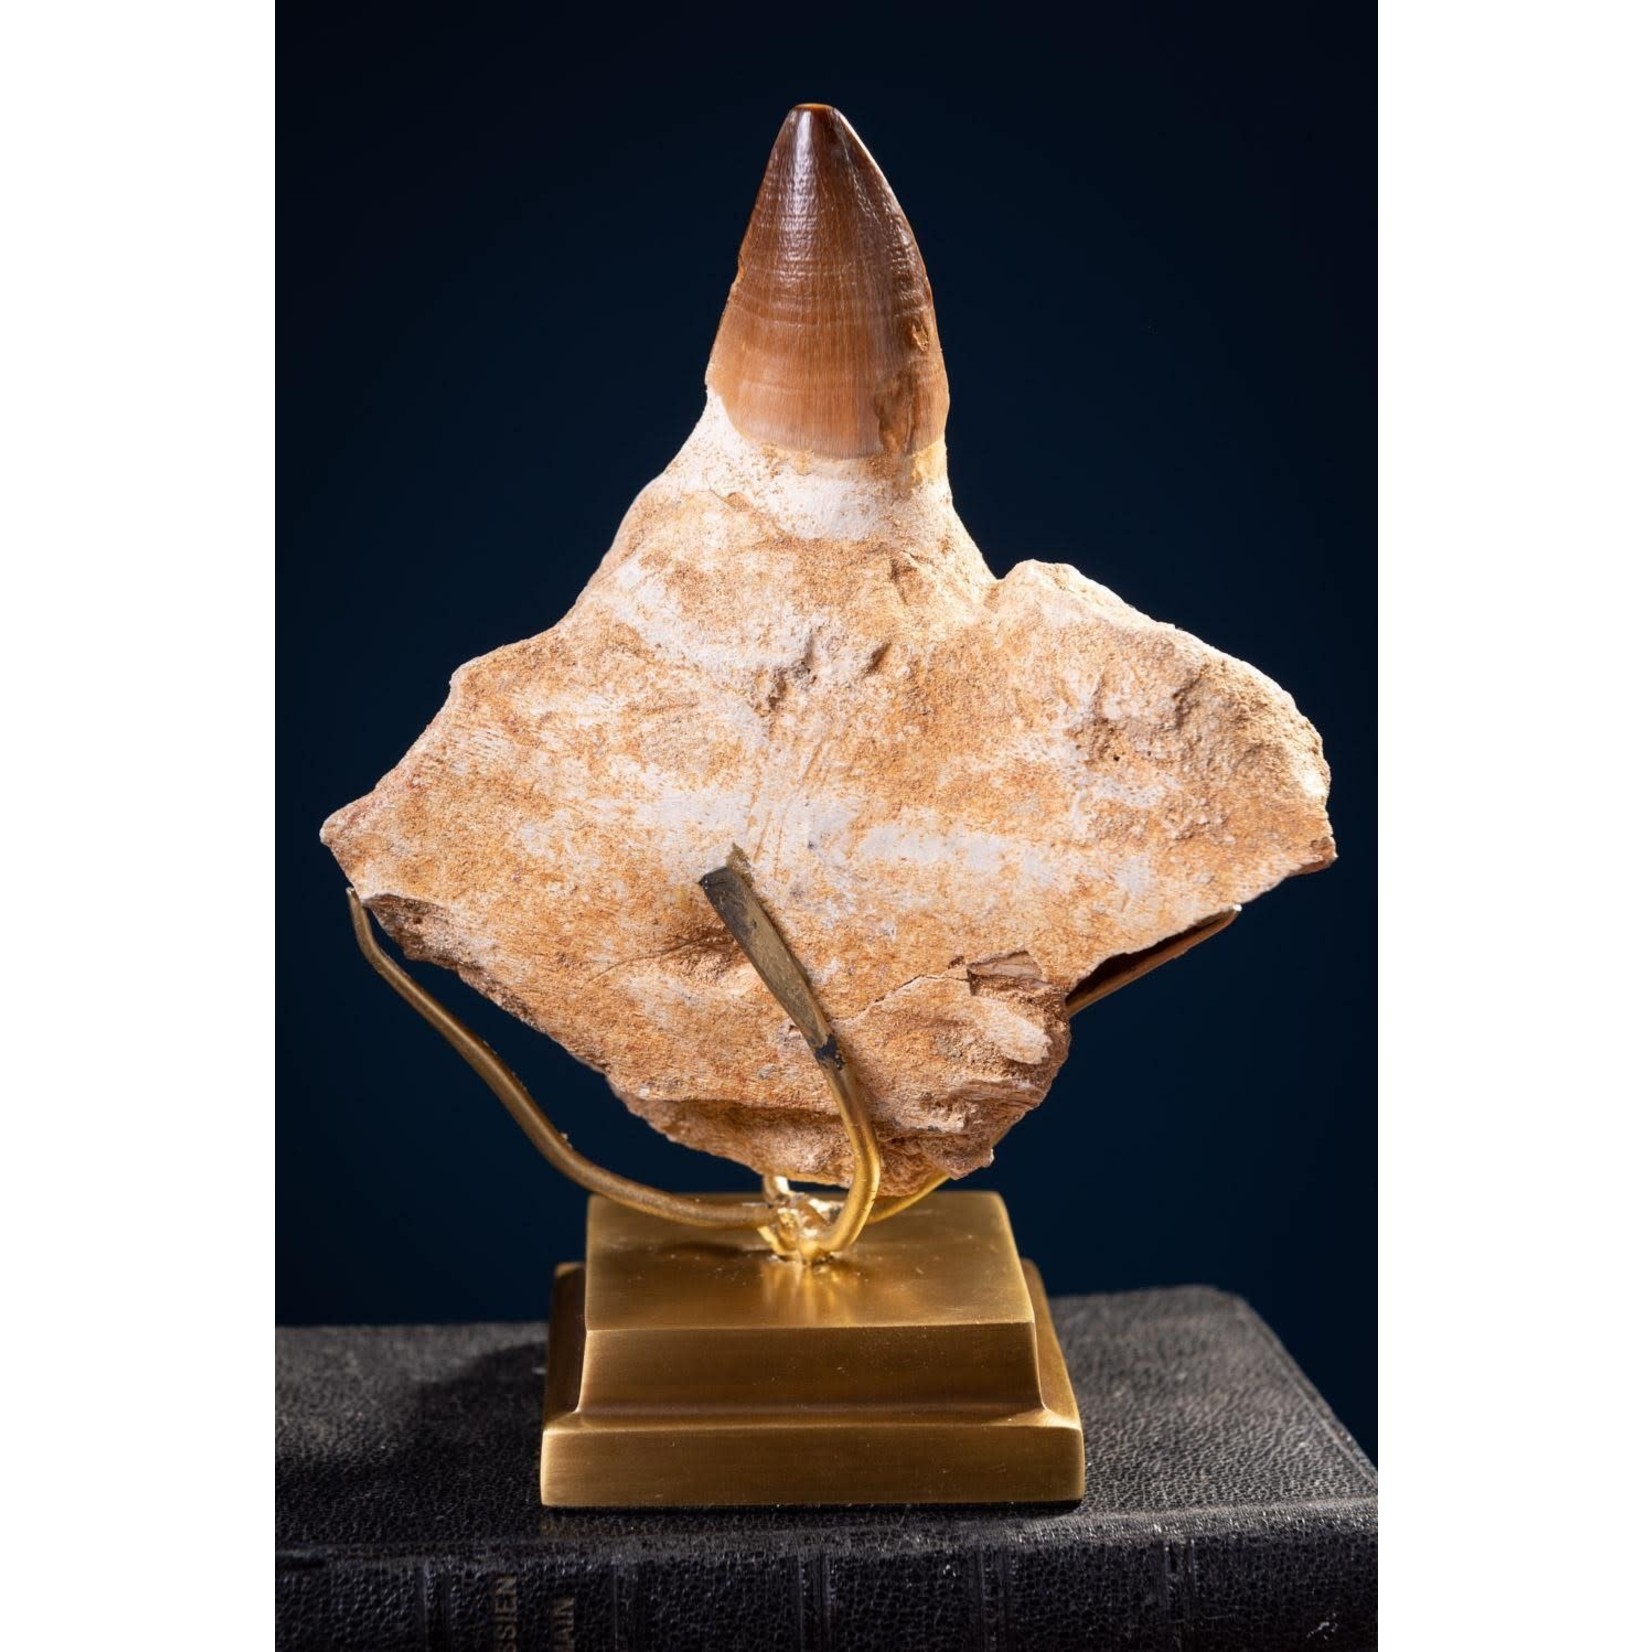 OBJET DE CURIOSITE MOSASAURUS TOOTH IN JAW ON BRASS BASE